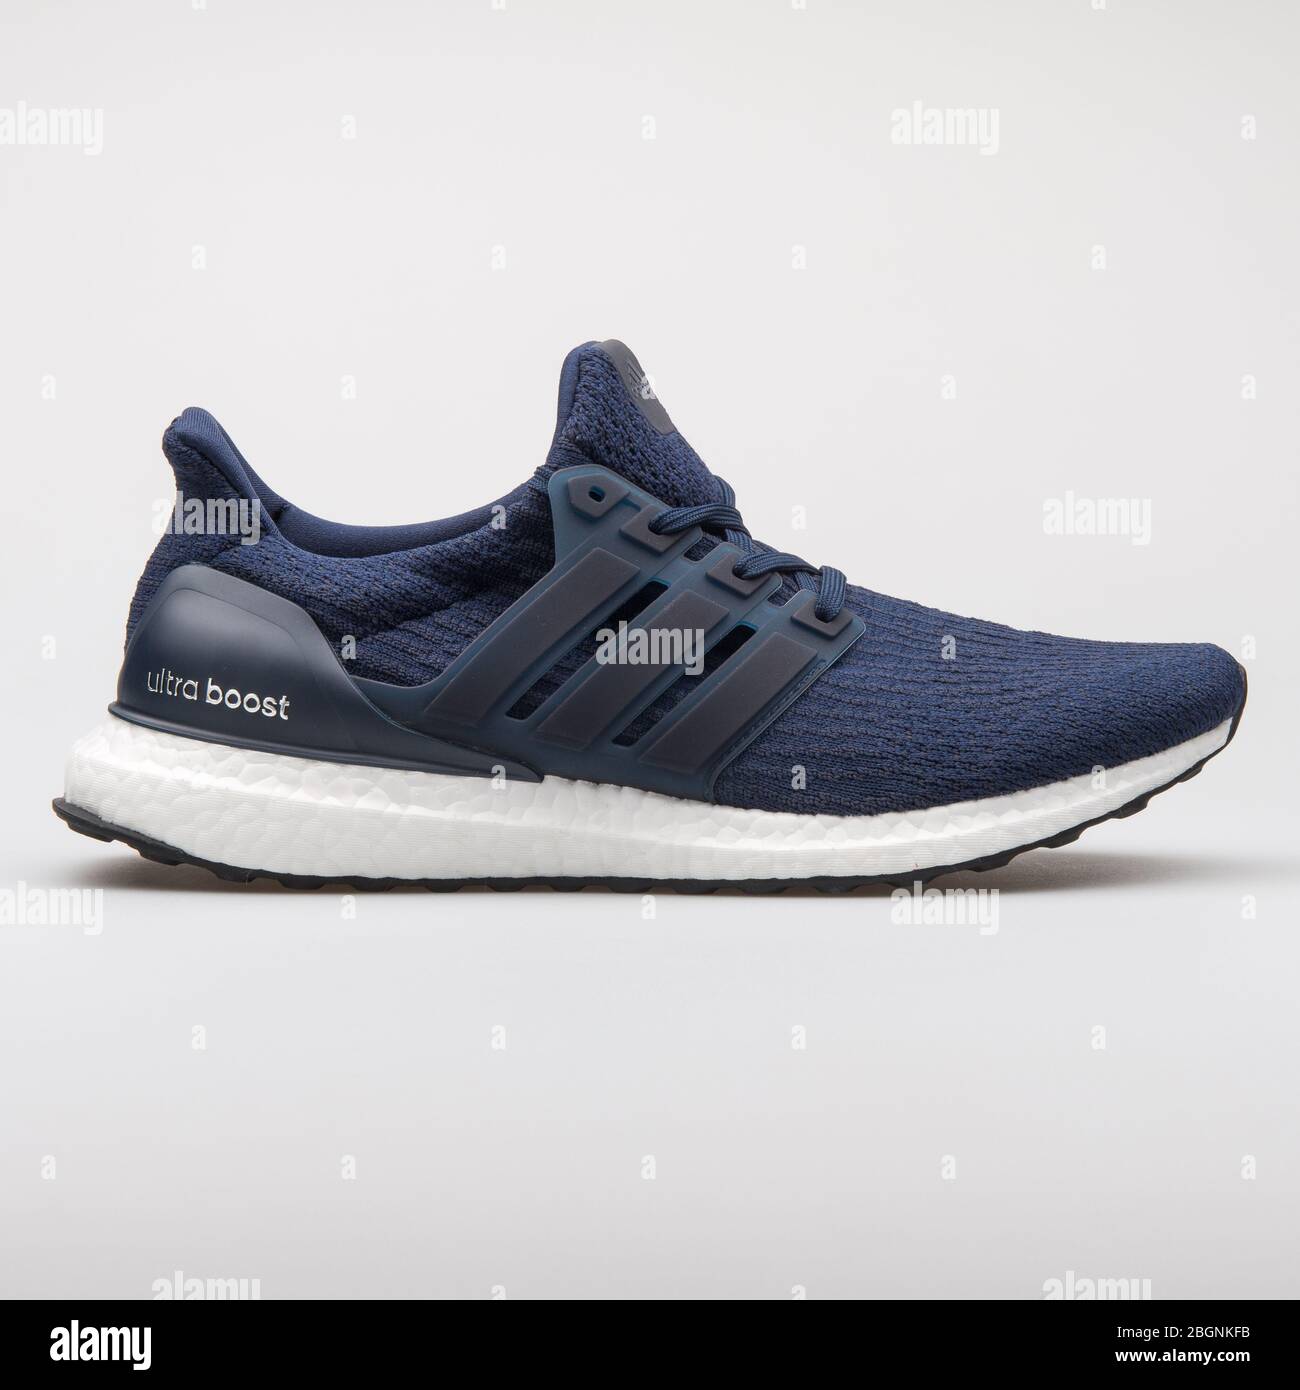 Adidas Ultraboost High Resolution Stock Photography and Images - Alamy